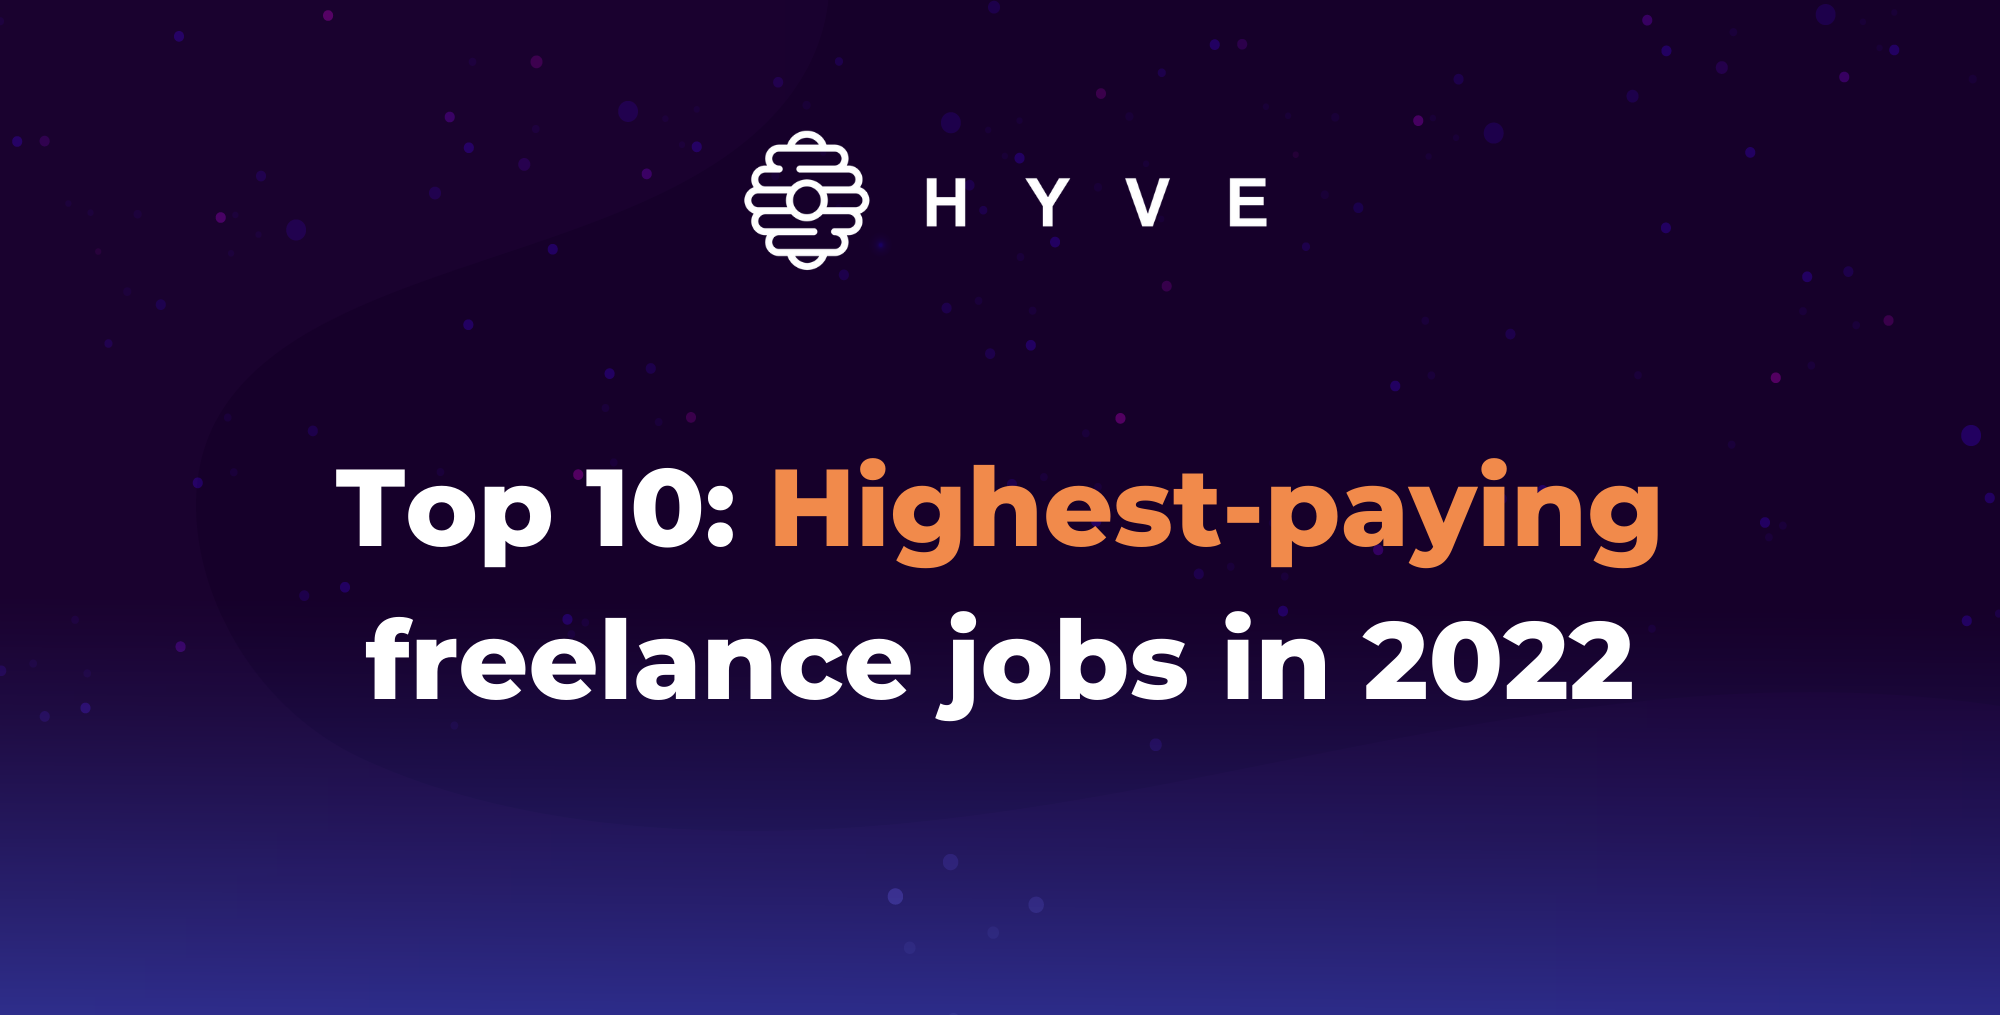 Top 10: Highest-paying freelance jobs in 2022